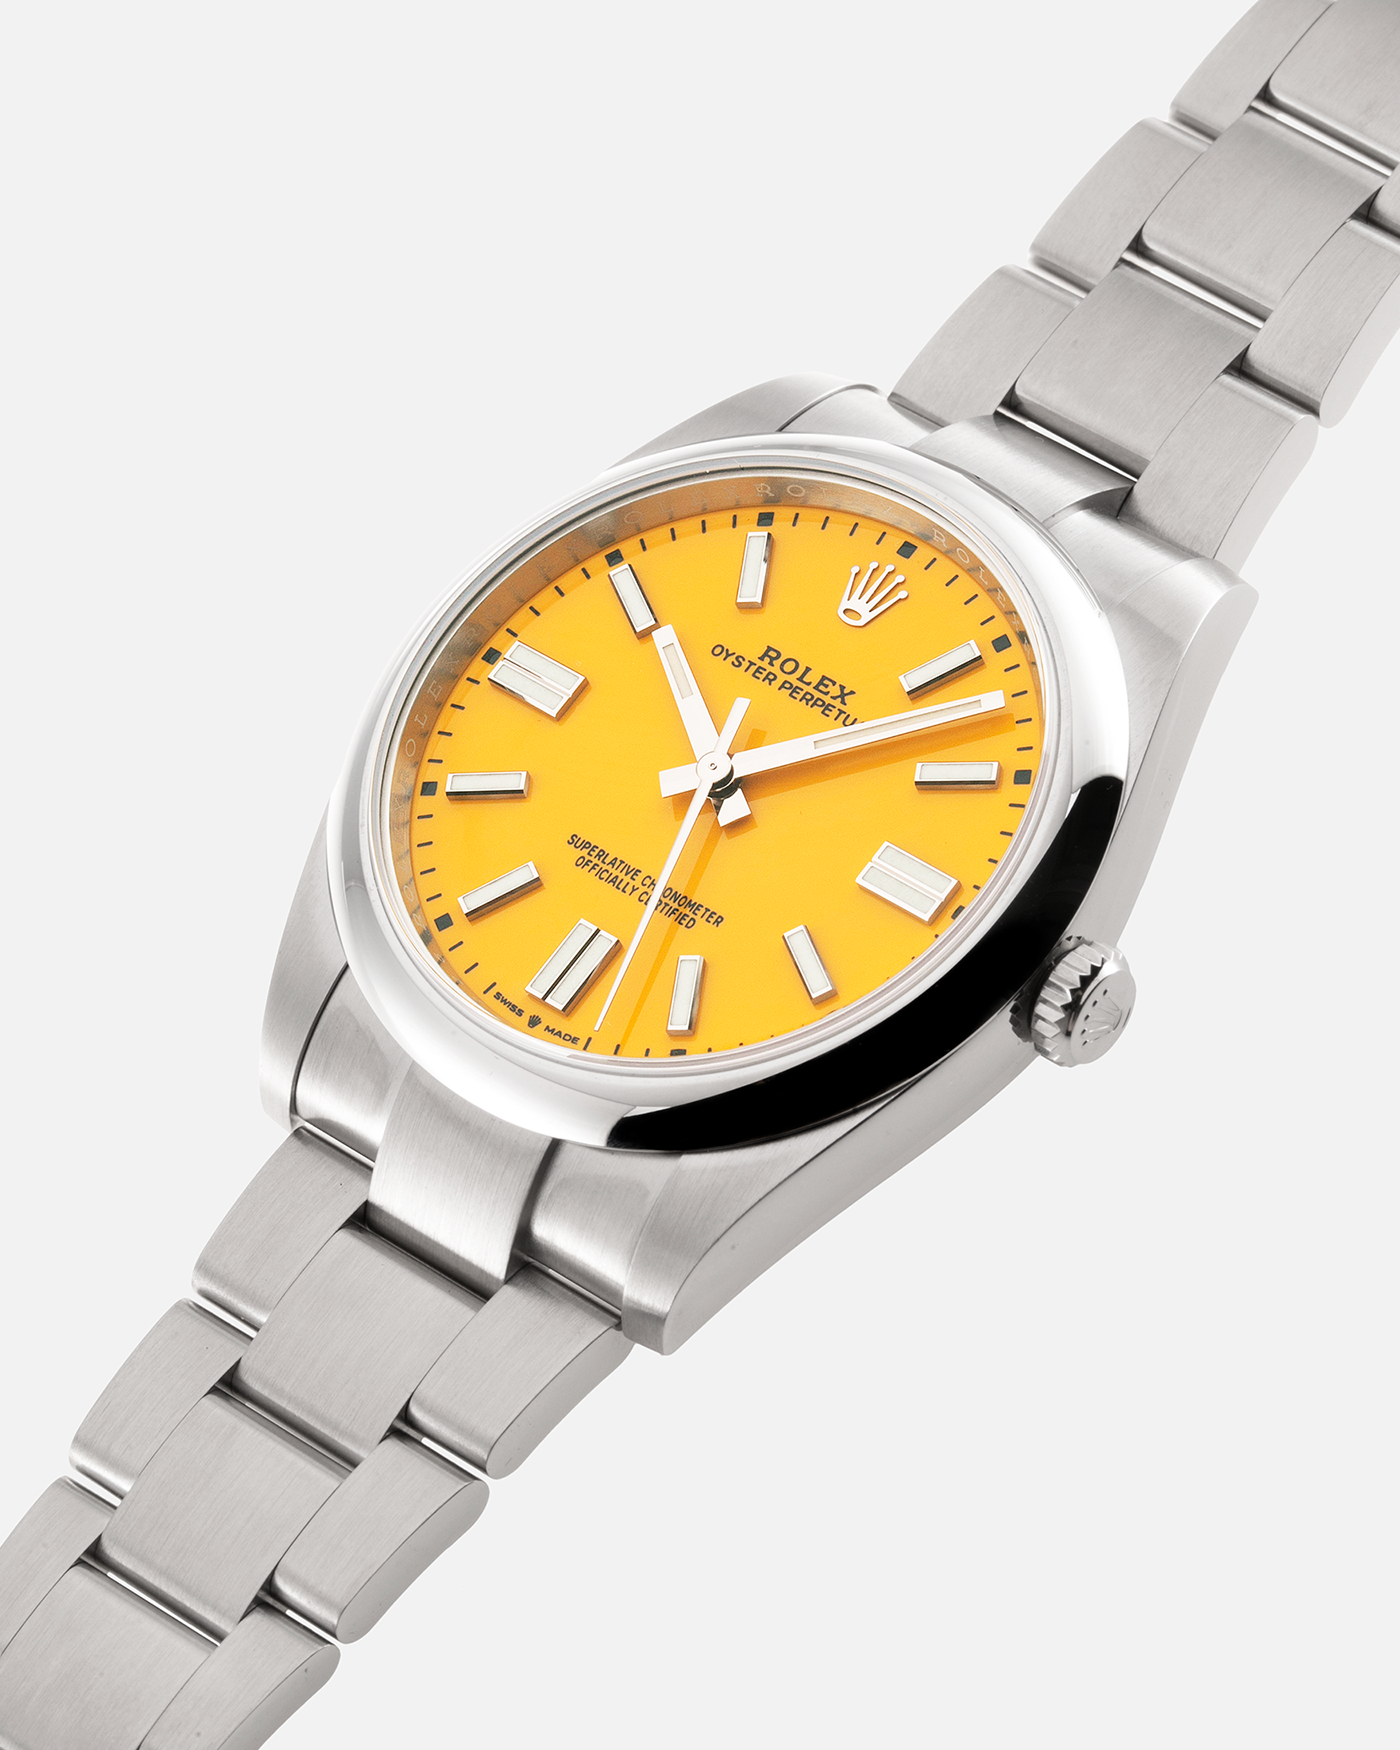 Brand: Rolex Year: 2022 Model: Oyster Perpetual 41 Reference Number: 124300 Material: 904L Stainless Steel Movement: Cal. 3230 Case Diameter: 41mm Bracelet: Stainless Steel Rolex Oyster Bracelet